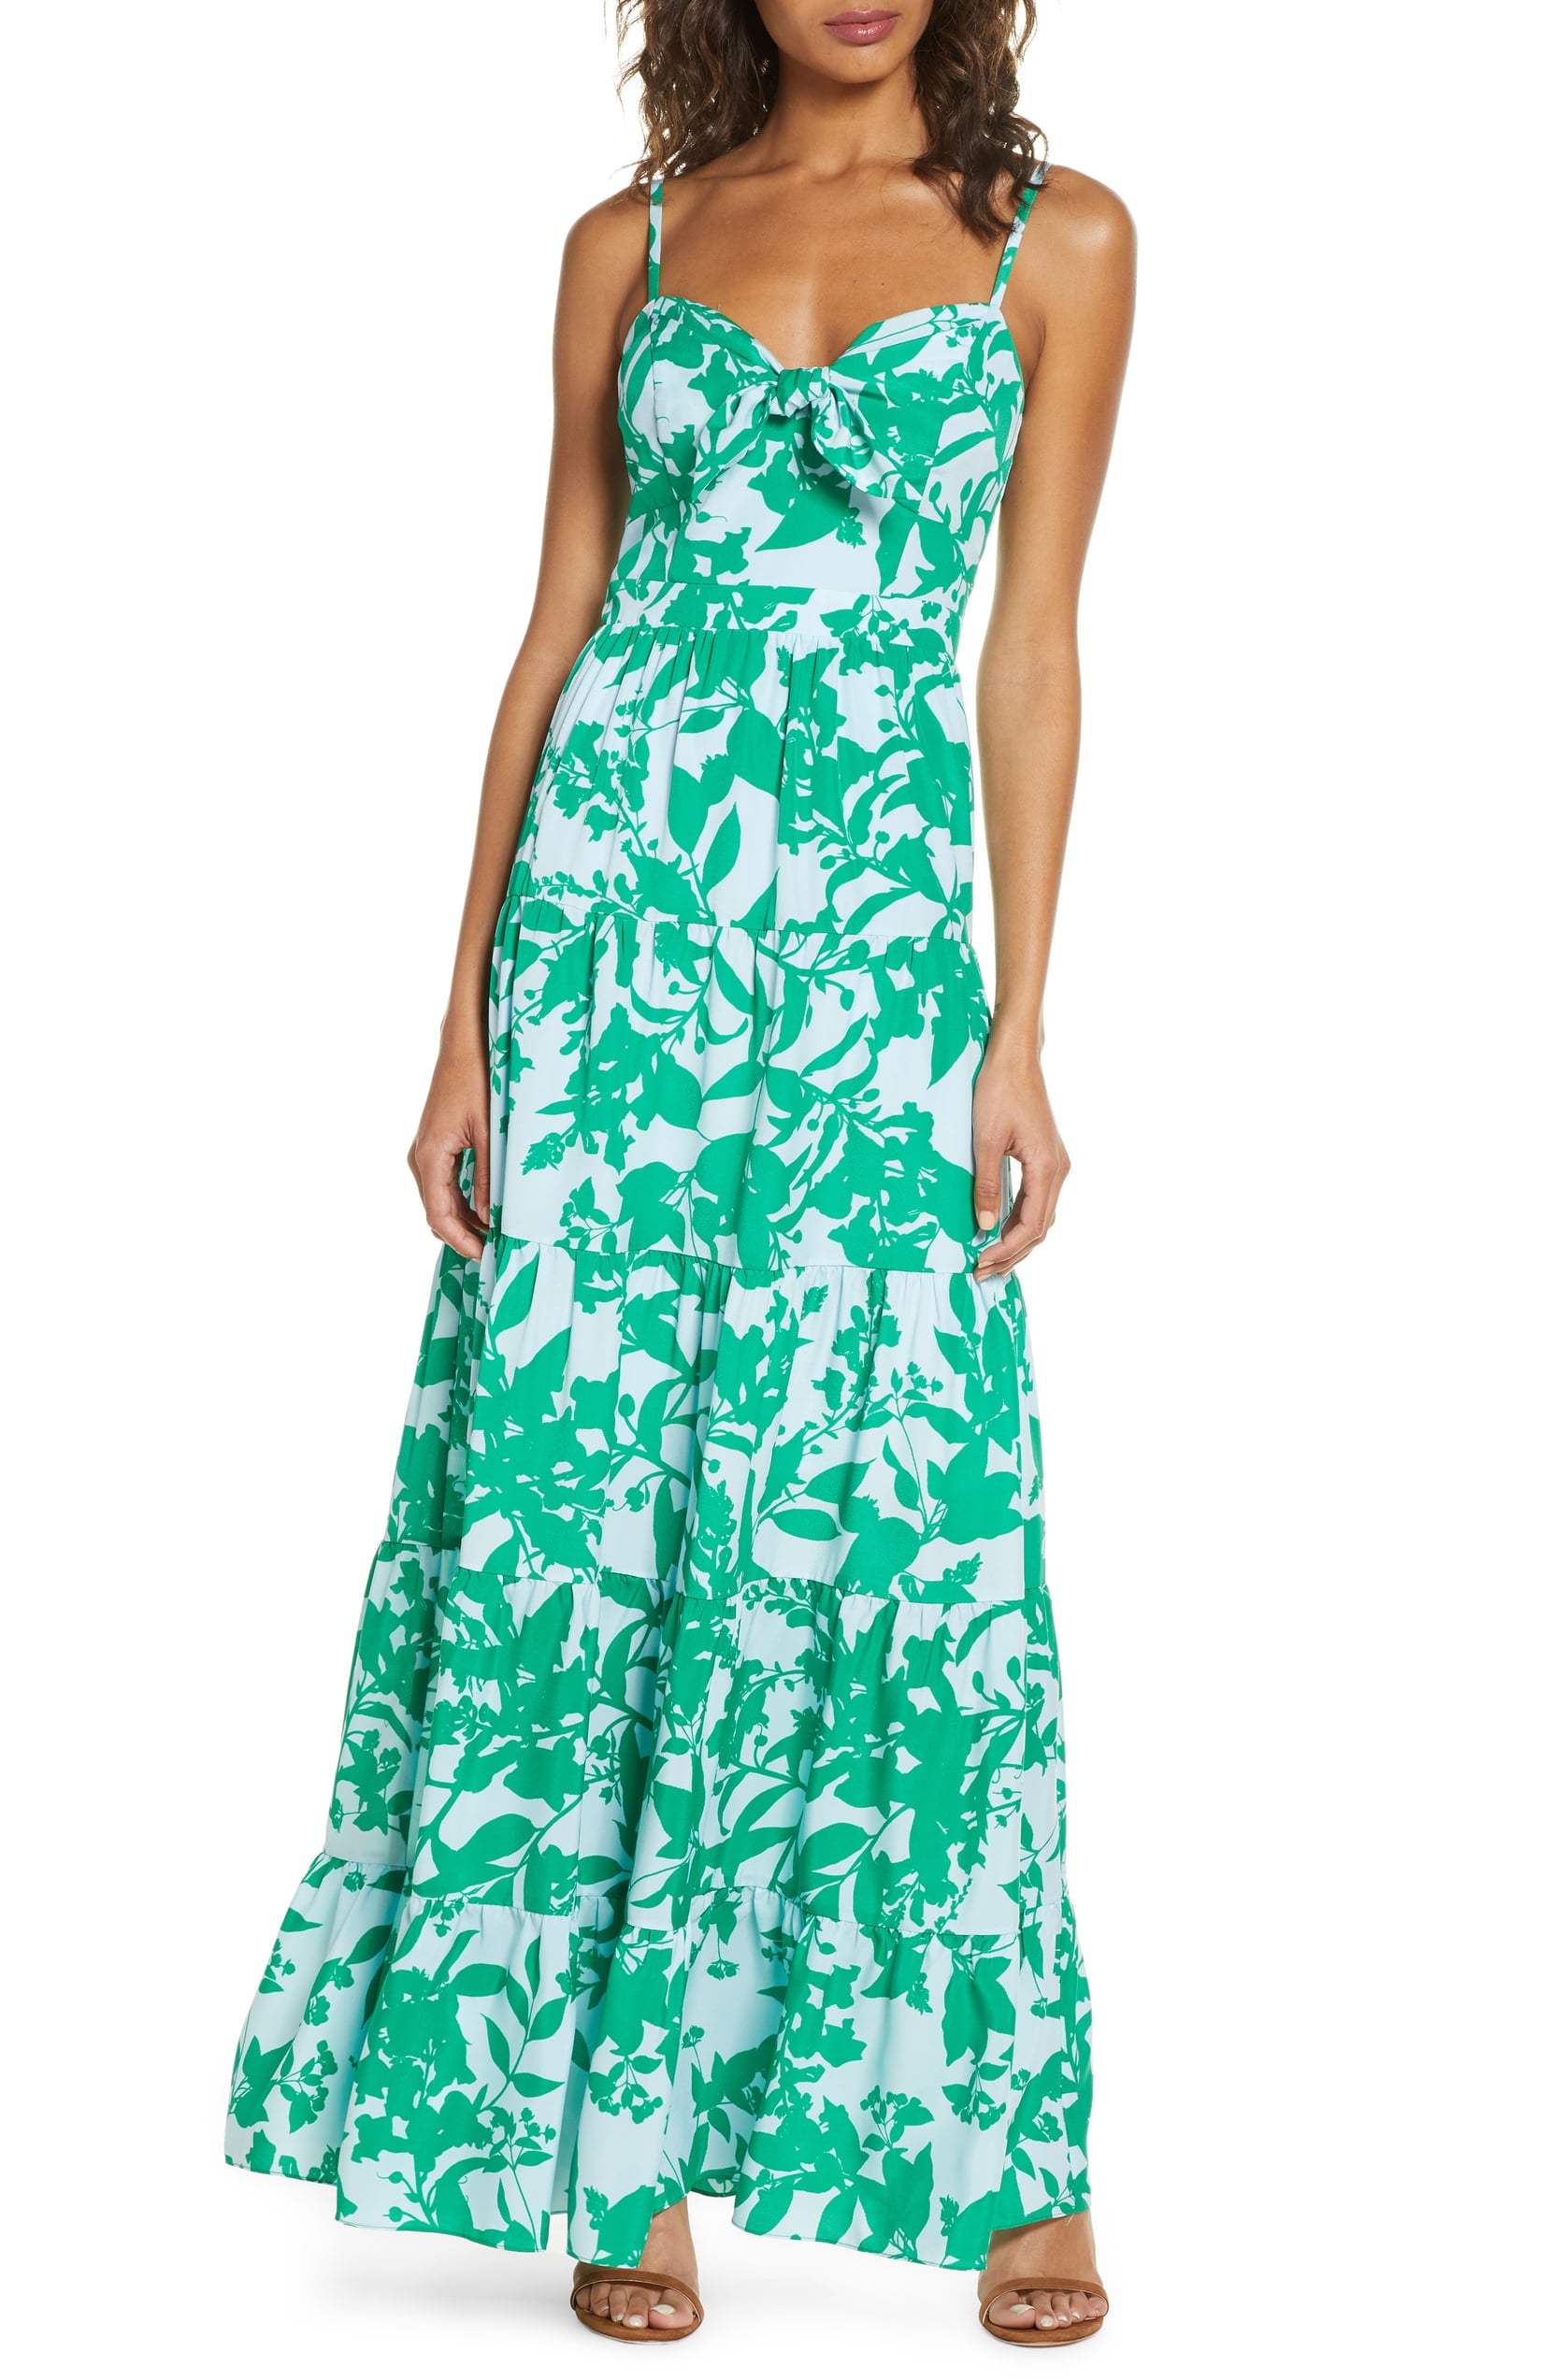 Eliza J Floral Tie Front Tiered Maxi Sundress